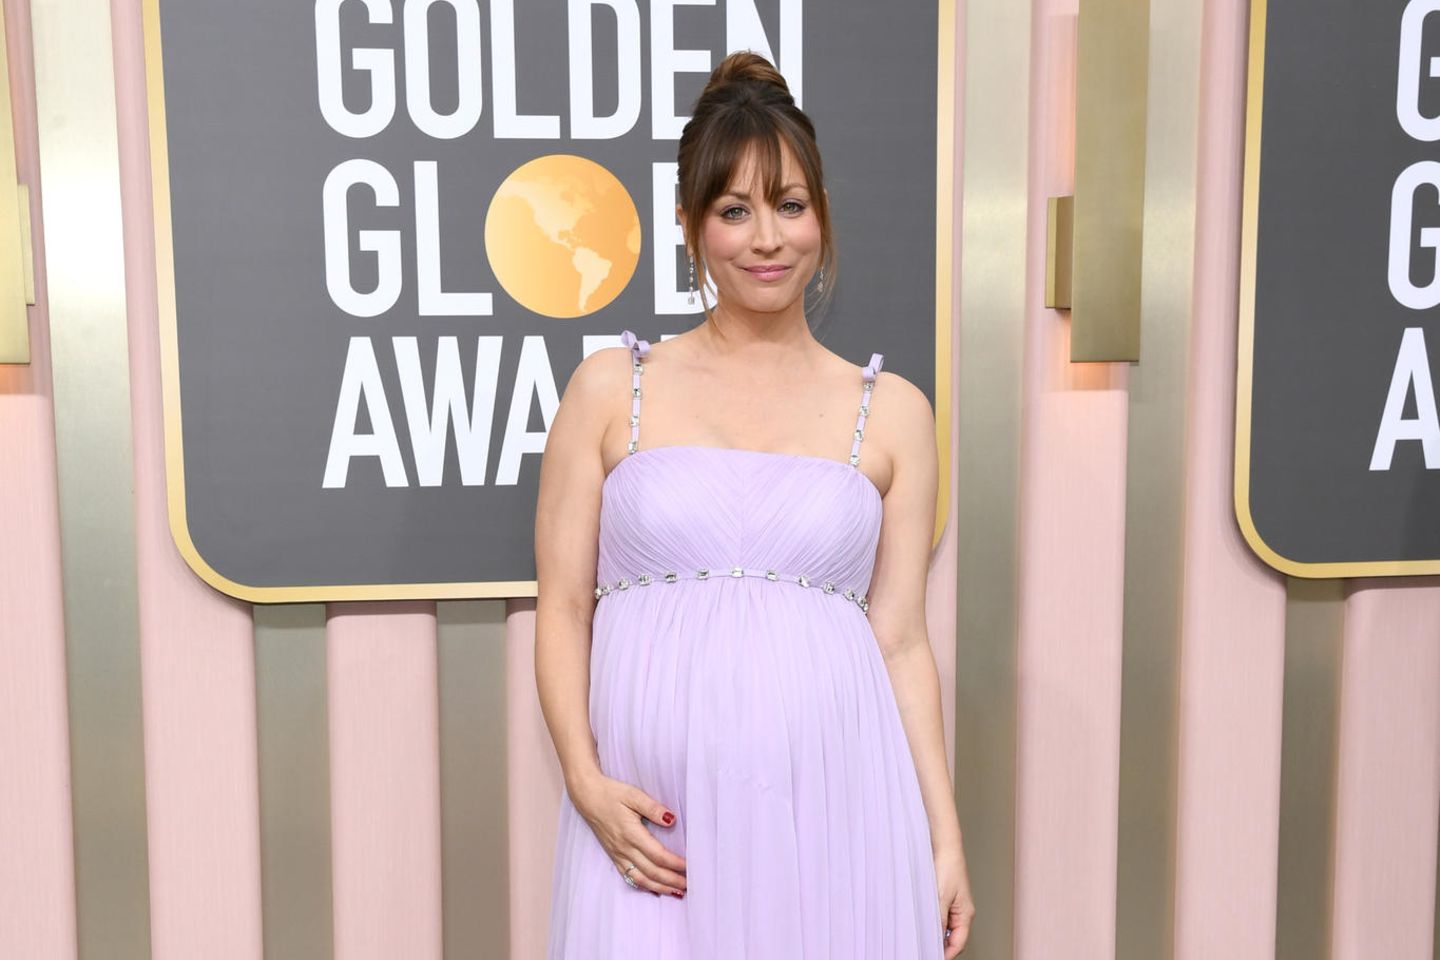 Kaley Cuoco wraps her baby bump in a delicate lilac gown at the Golden Globes